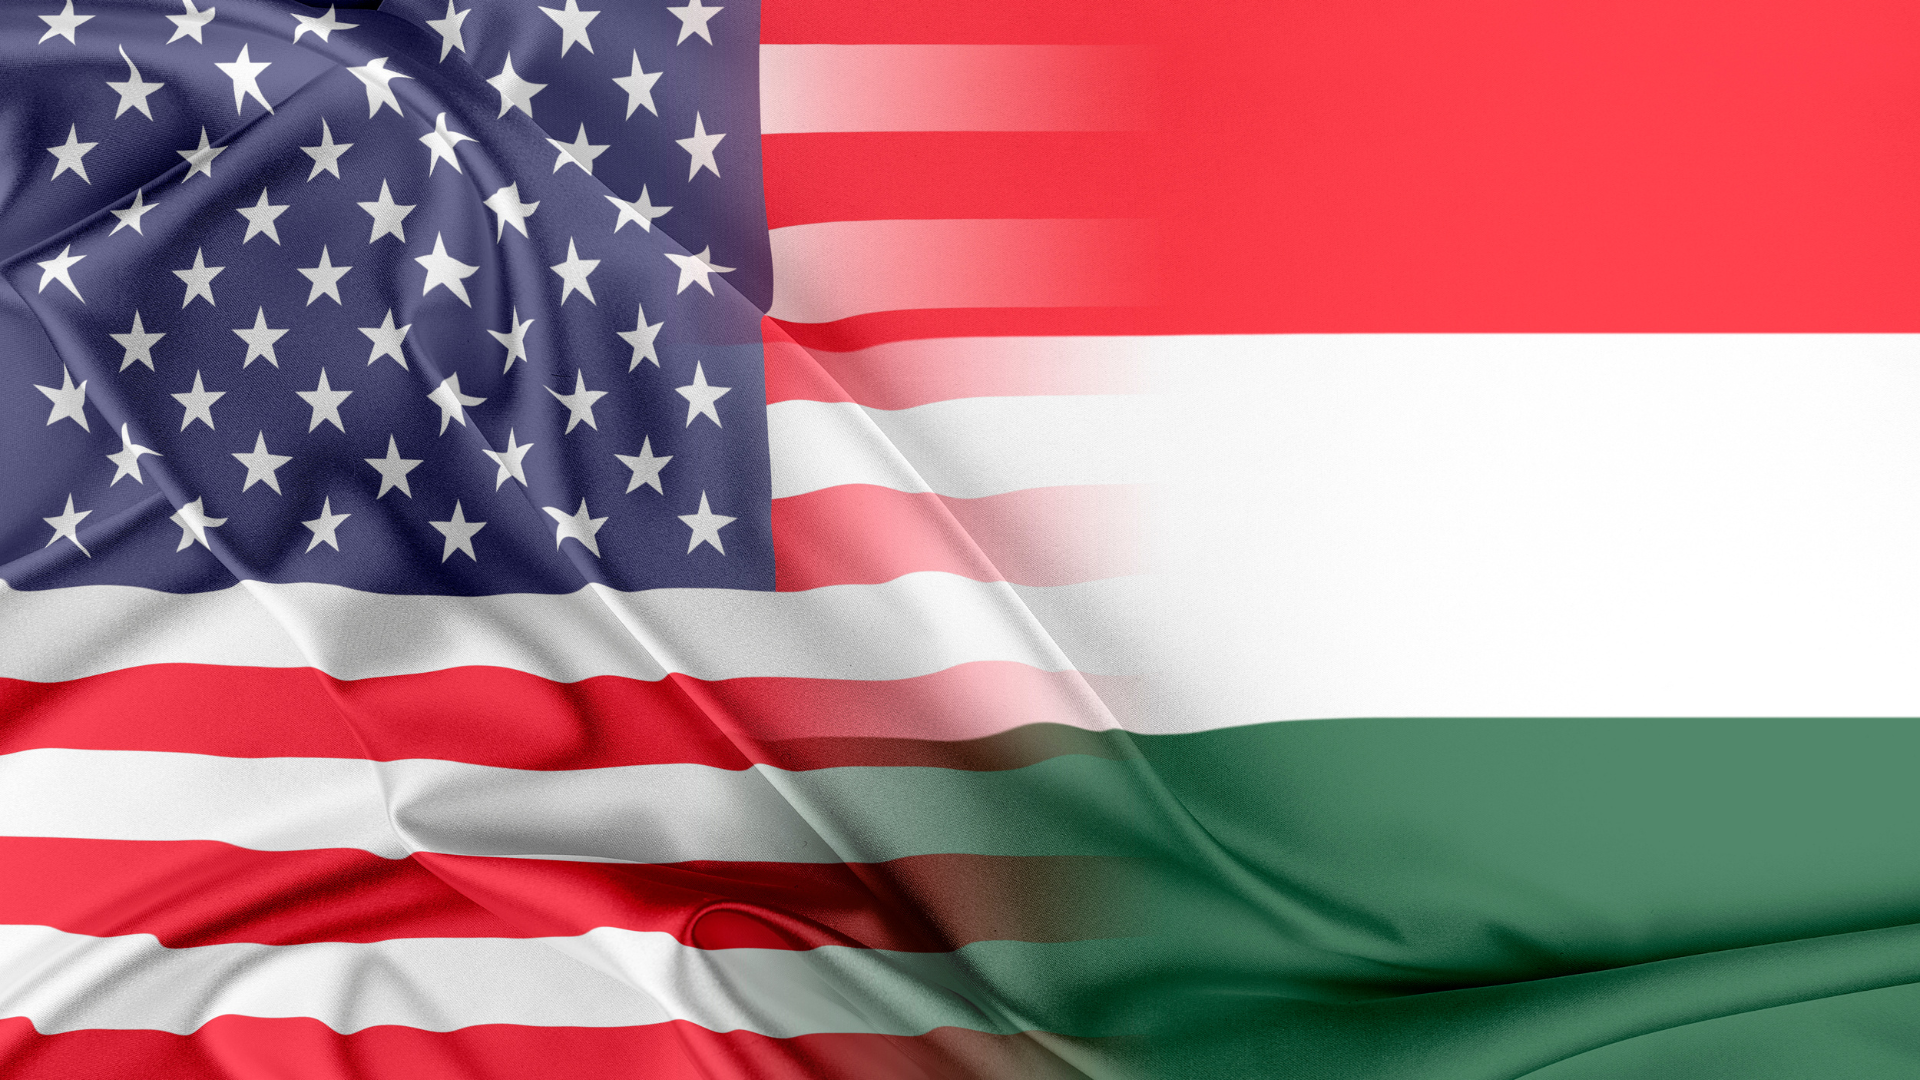 HUNGARIANS SAY YES TO RELATIONS WITH THE US, BUT NO TO THE BILLBOARD CAMPAIGN